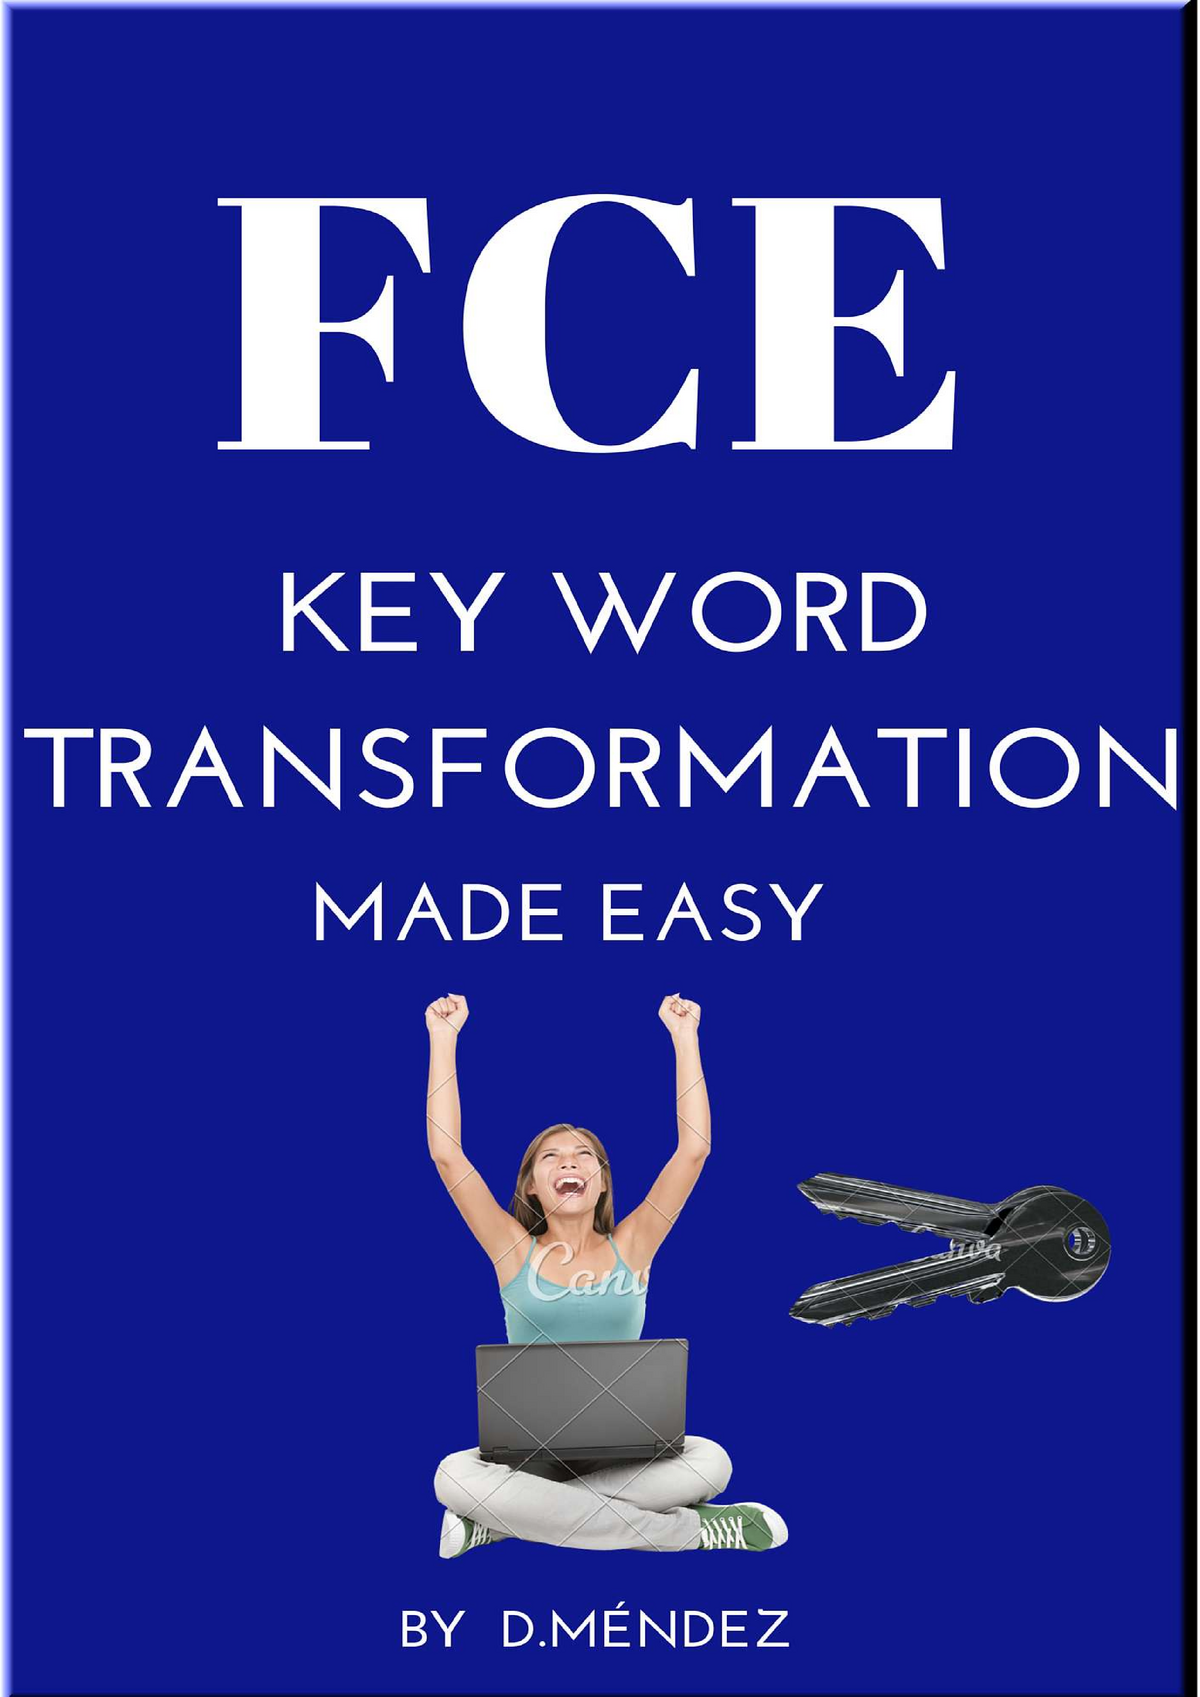 Fce Key Word Transformation Made Easy 1 While Every Precaution Has